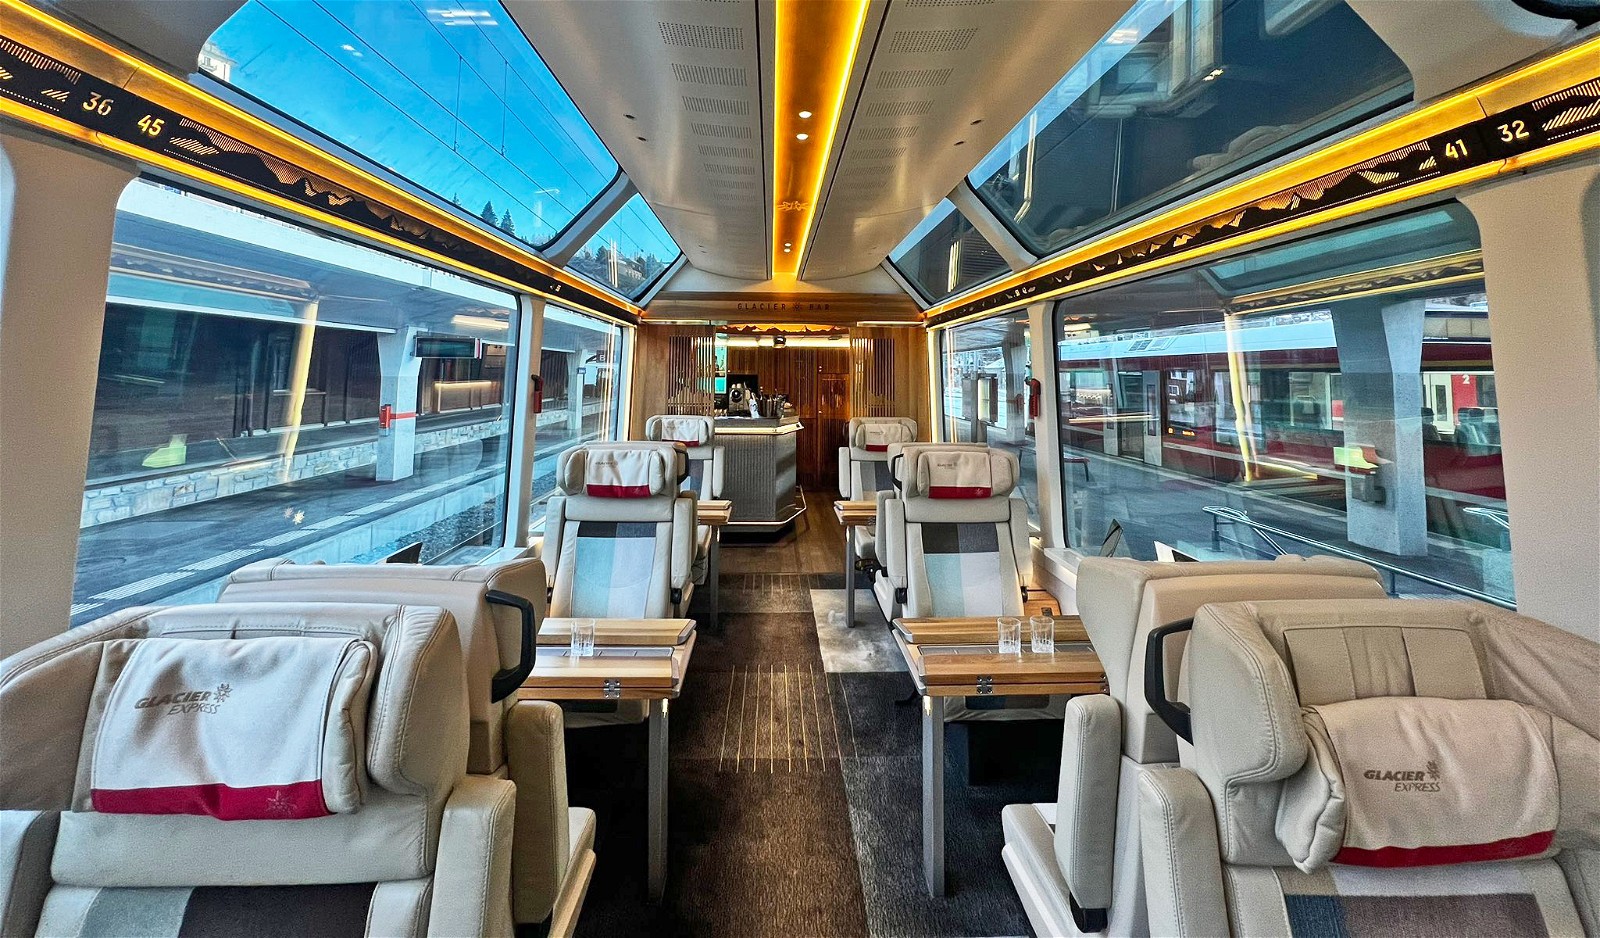 Glacier Express offers a variety of dining options on board, including breakfast, lunch, and dinner.